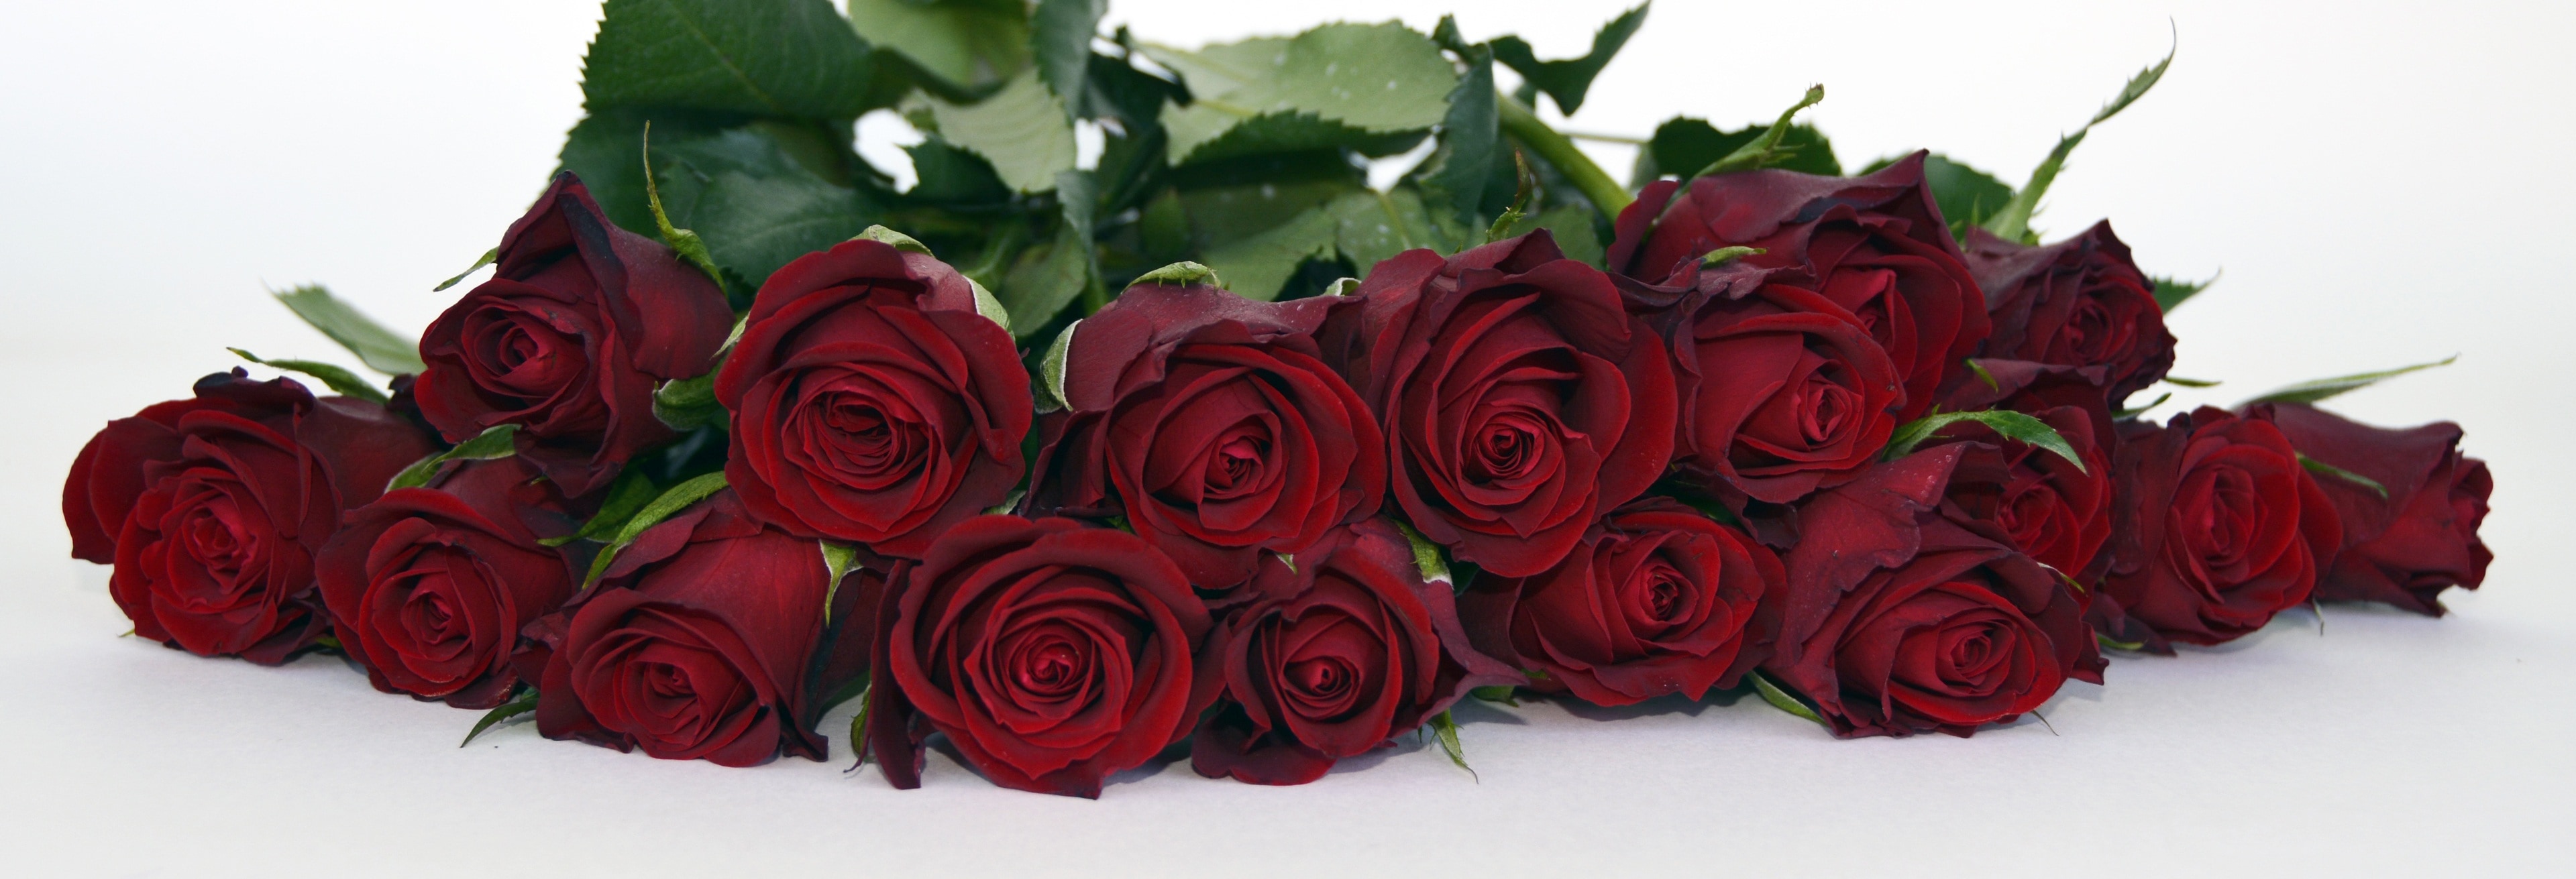 red roses on white surface